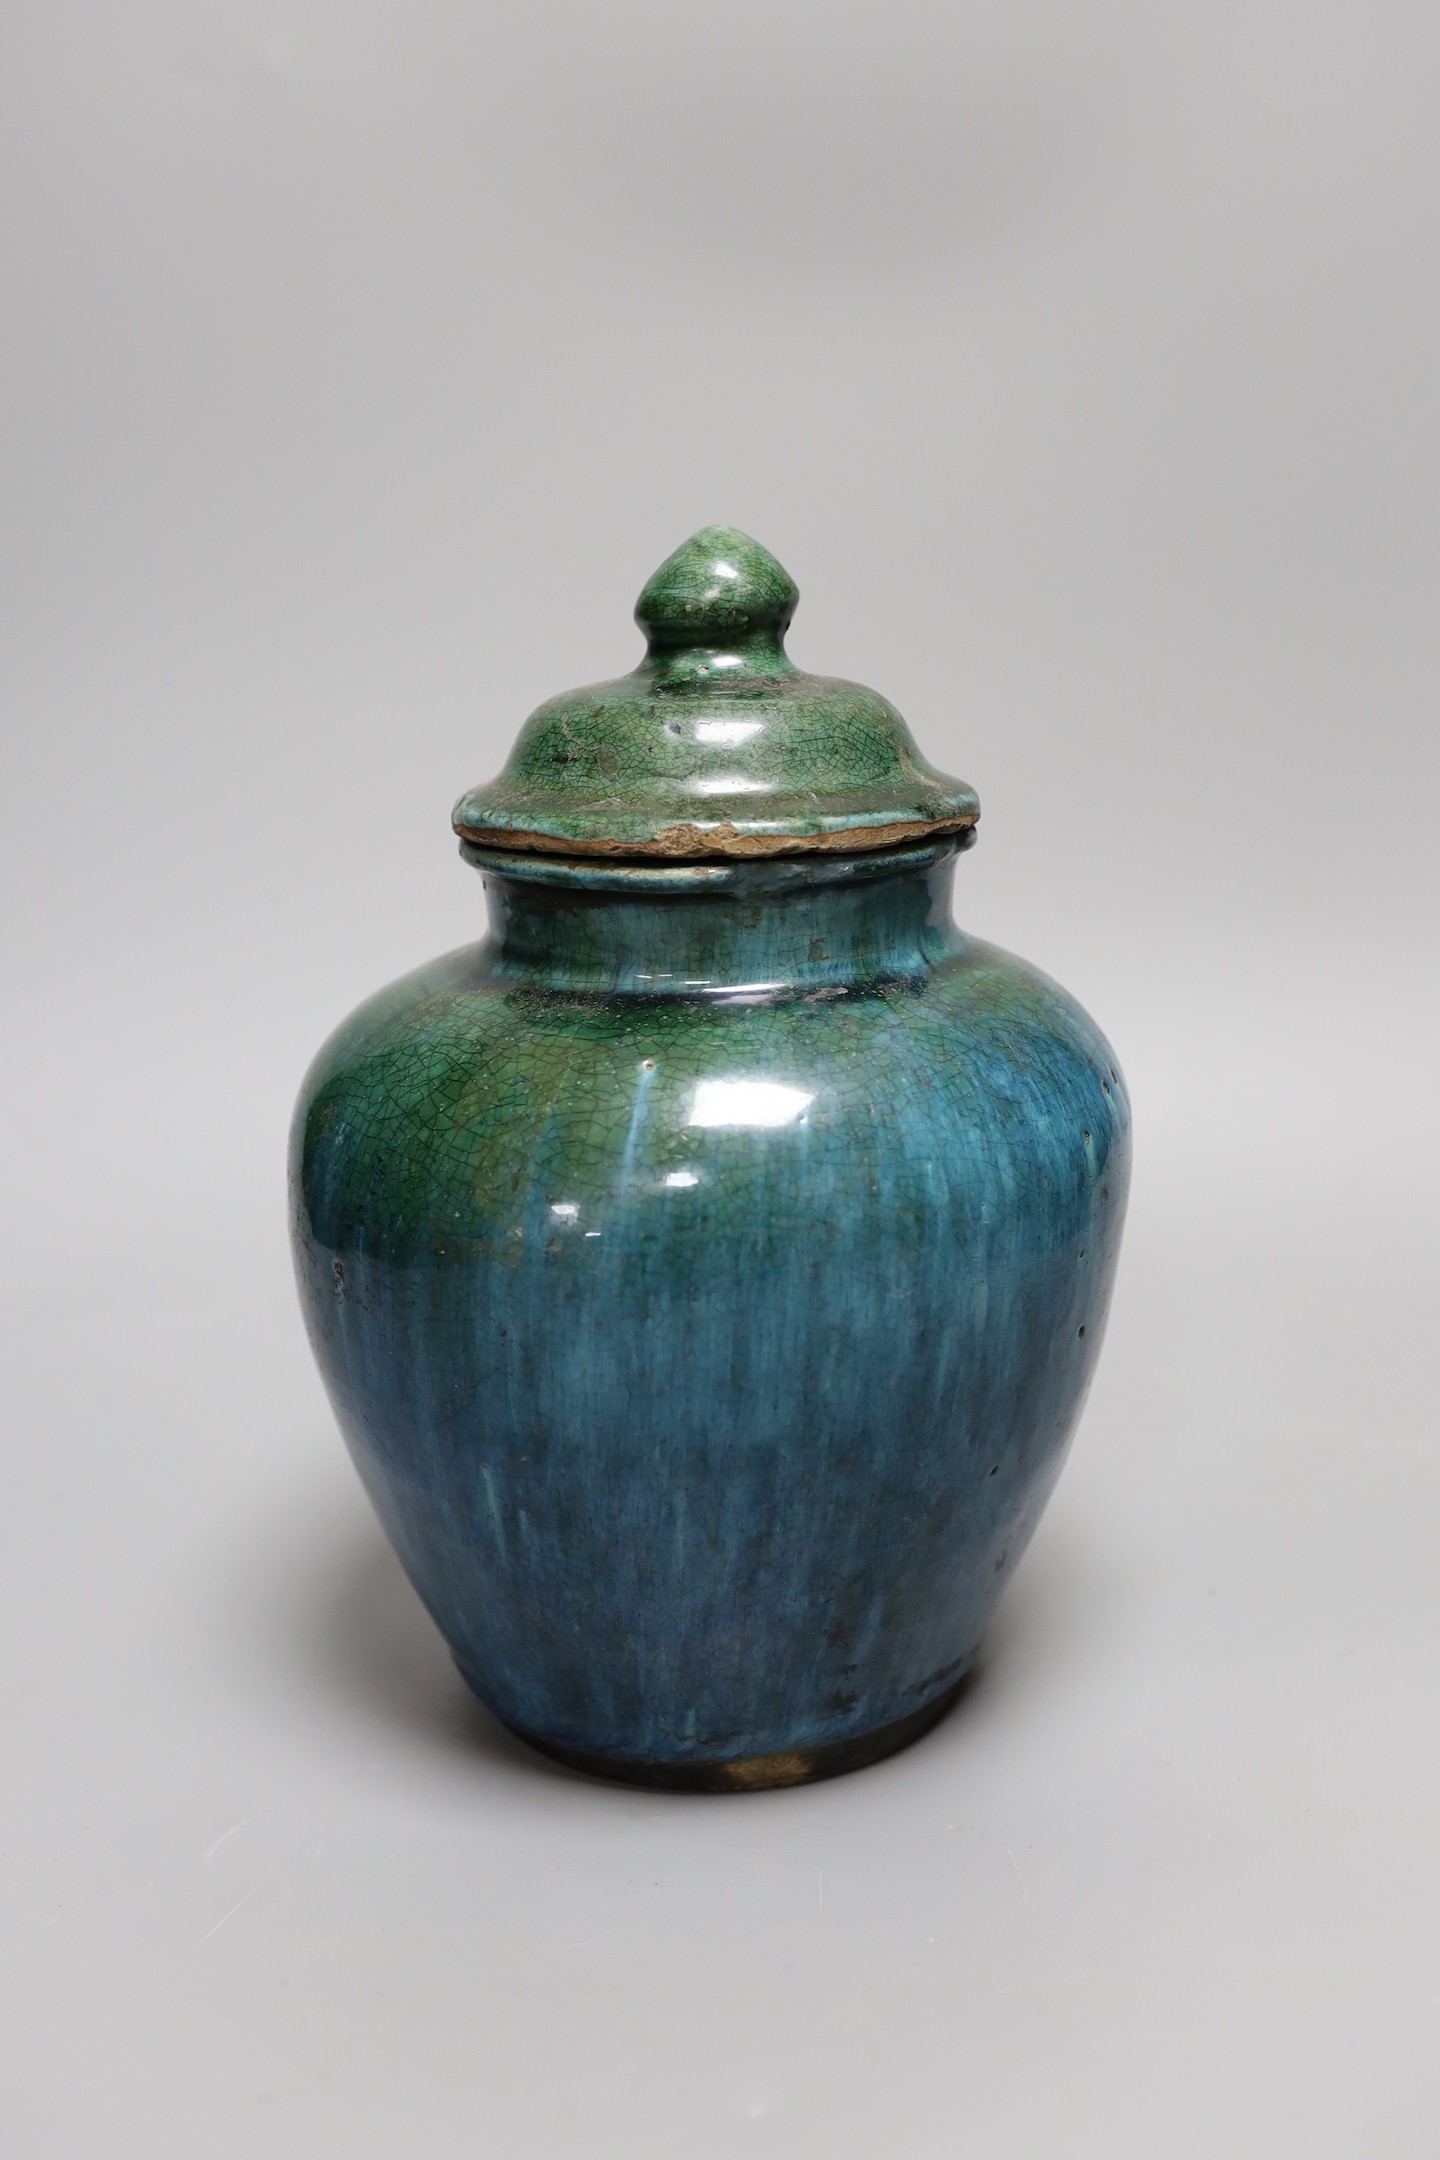 A Chinese mottle glazed terracotta jar and cover, 19th century, 24 cms high